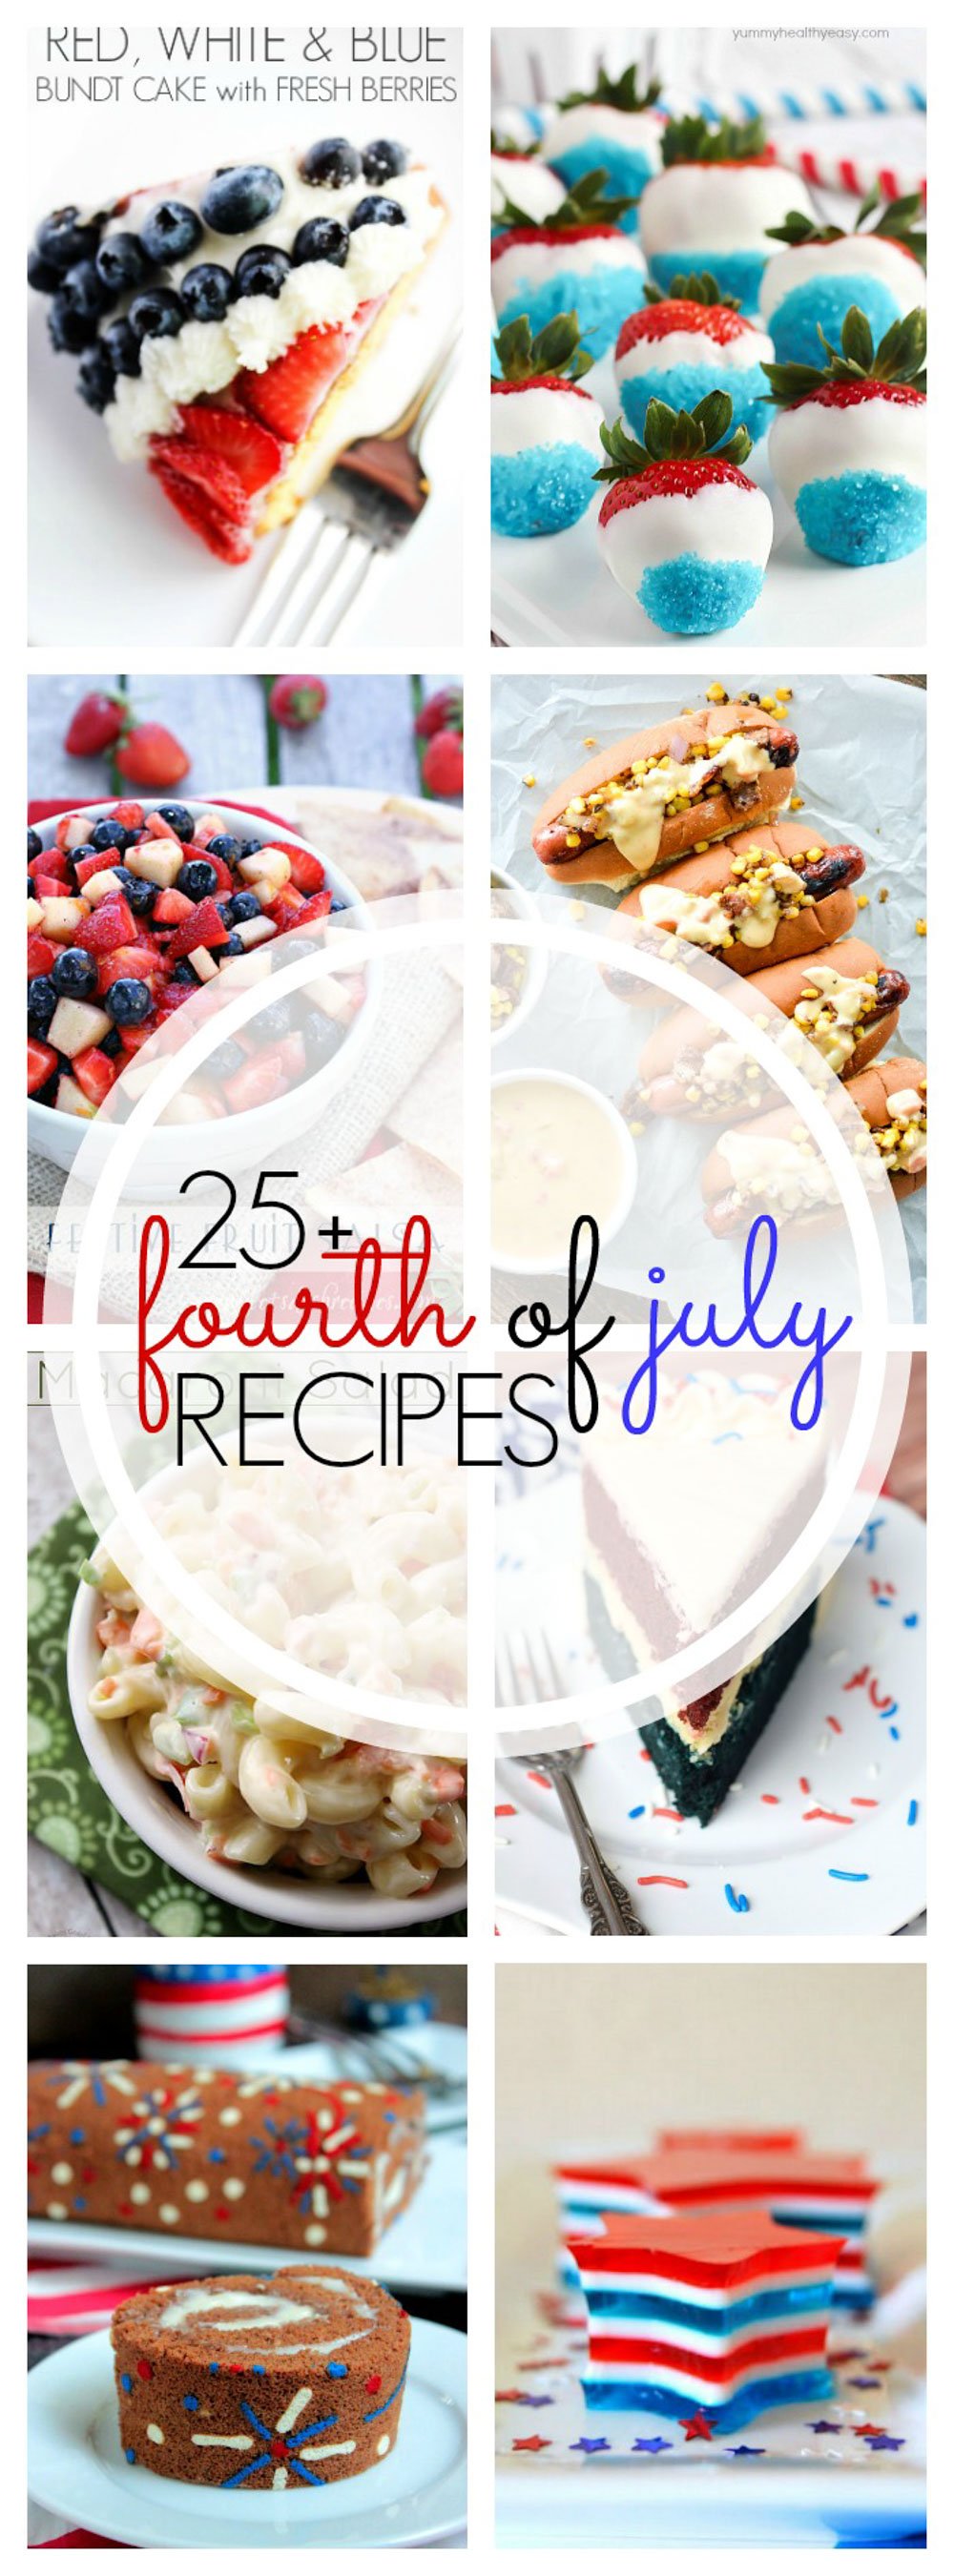 Red, White & Blue Cheesecake Mousse, Festive Fruit Salsa, 4th Of July Fireworks Cake Roll and MORE -- here are 25+ Fourth of July recipes!